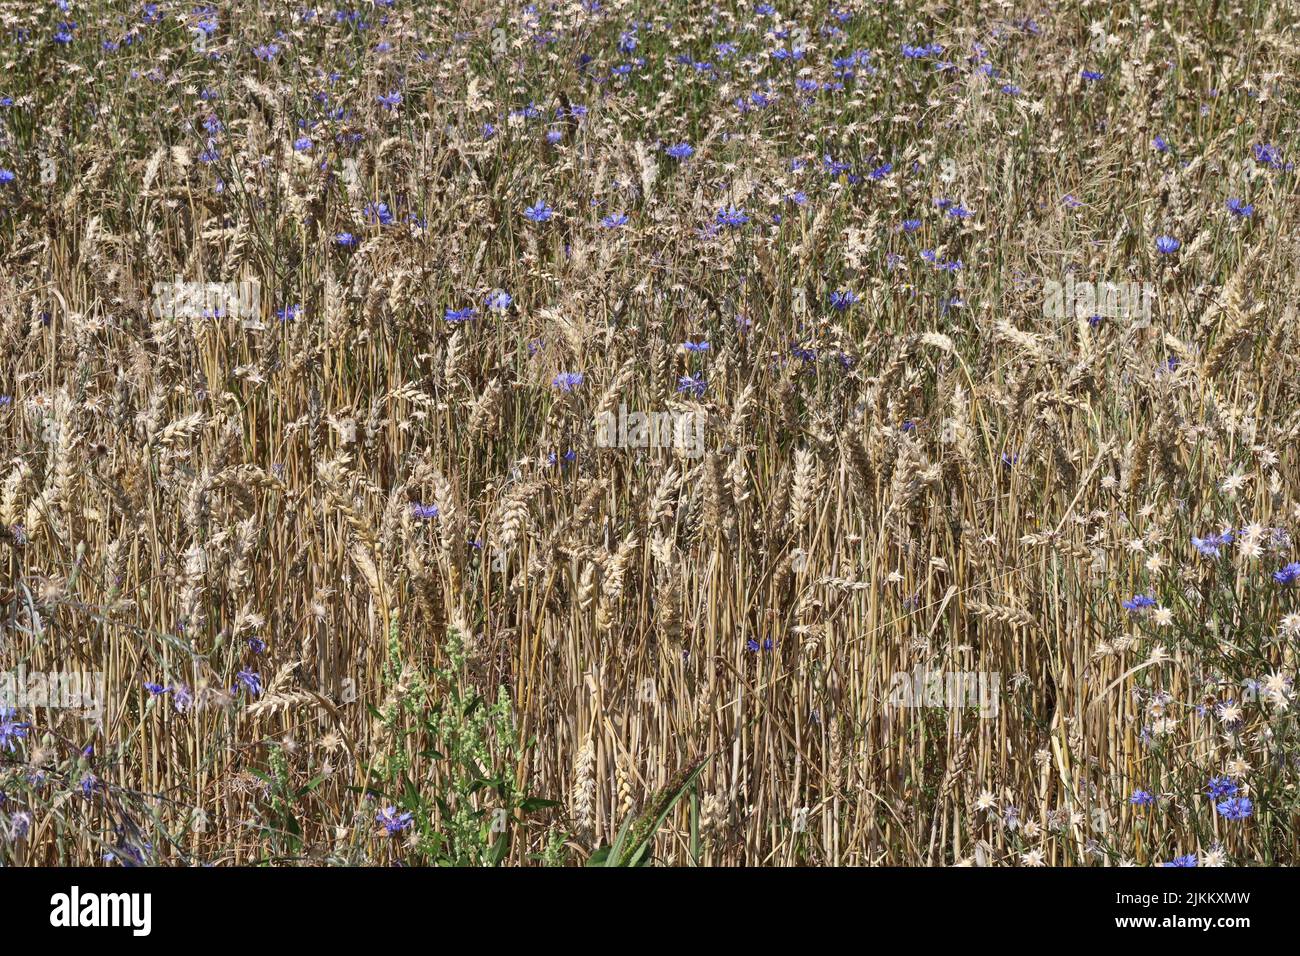 Cultivation of cereals with numerous weeds. Stock Photo